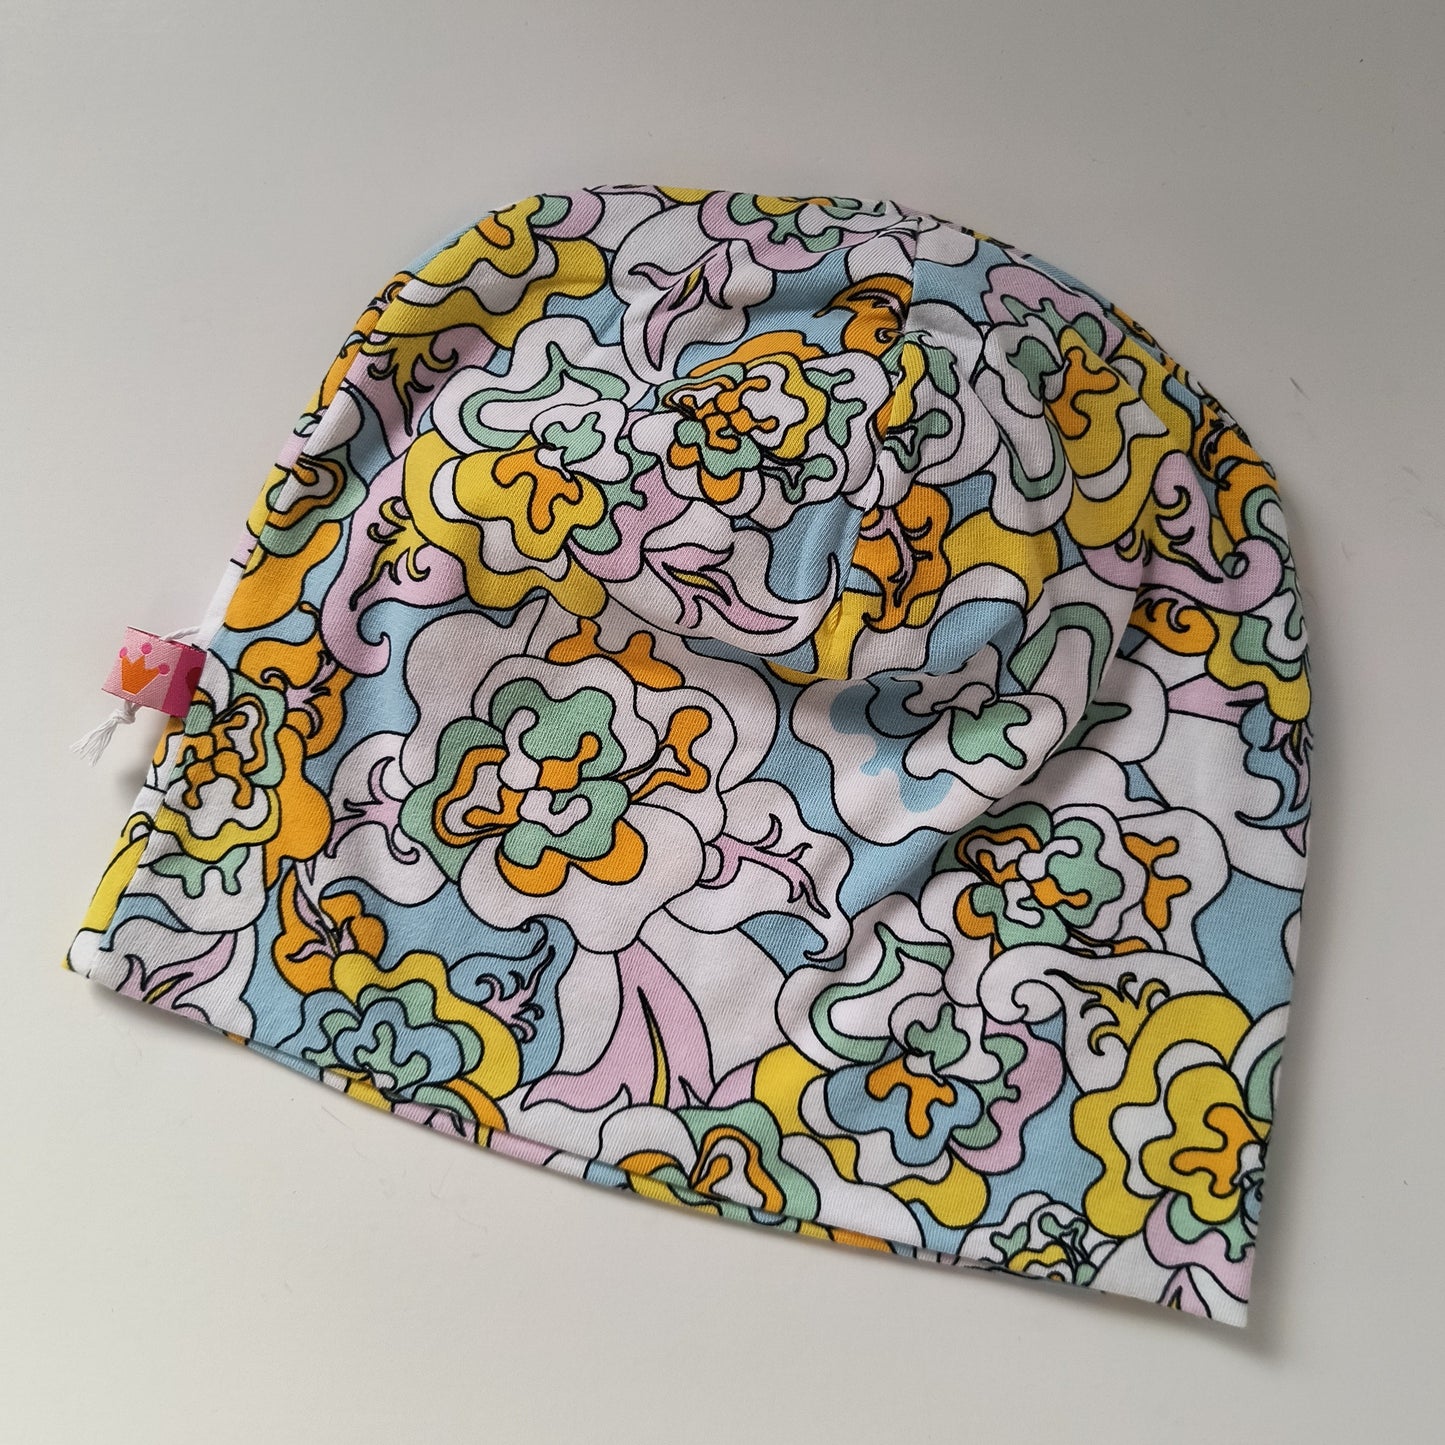 Toddler beanie hat, flower power, size EUR 52 cm head circumference/US 2-5 years (Handmade in Canada)